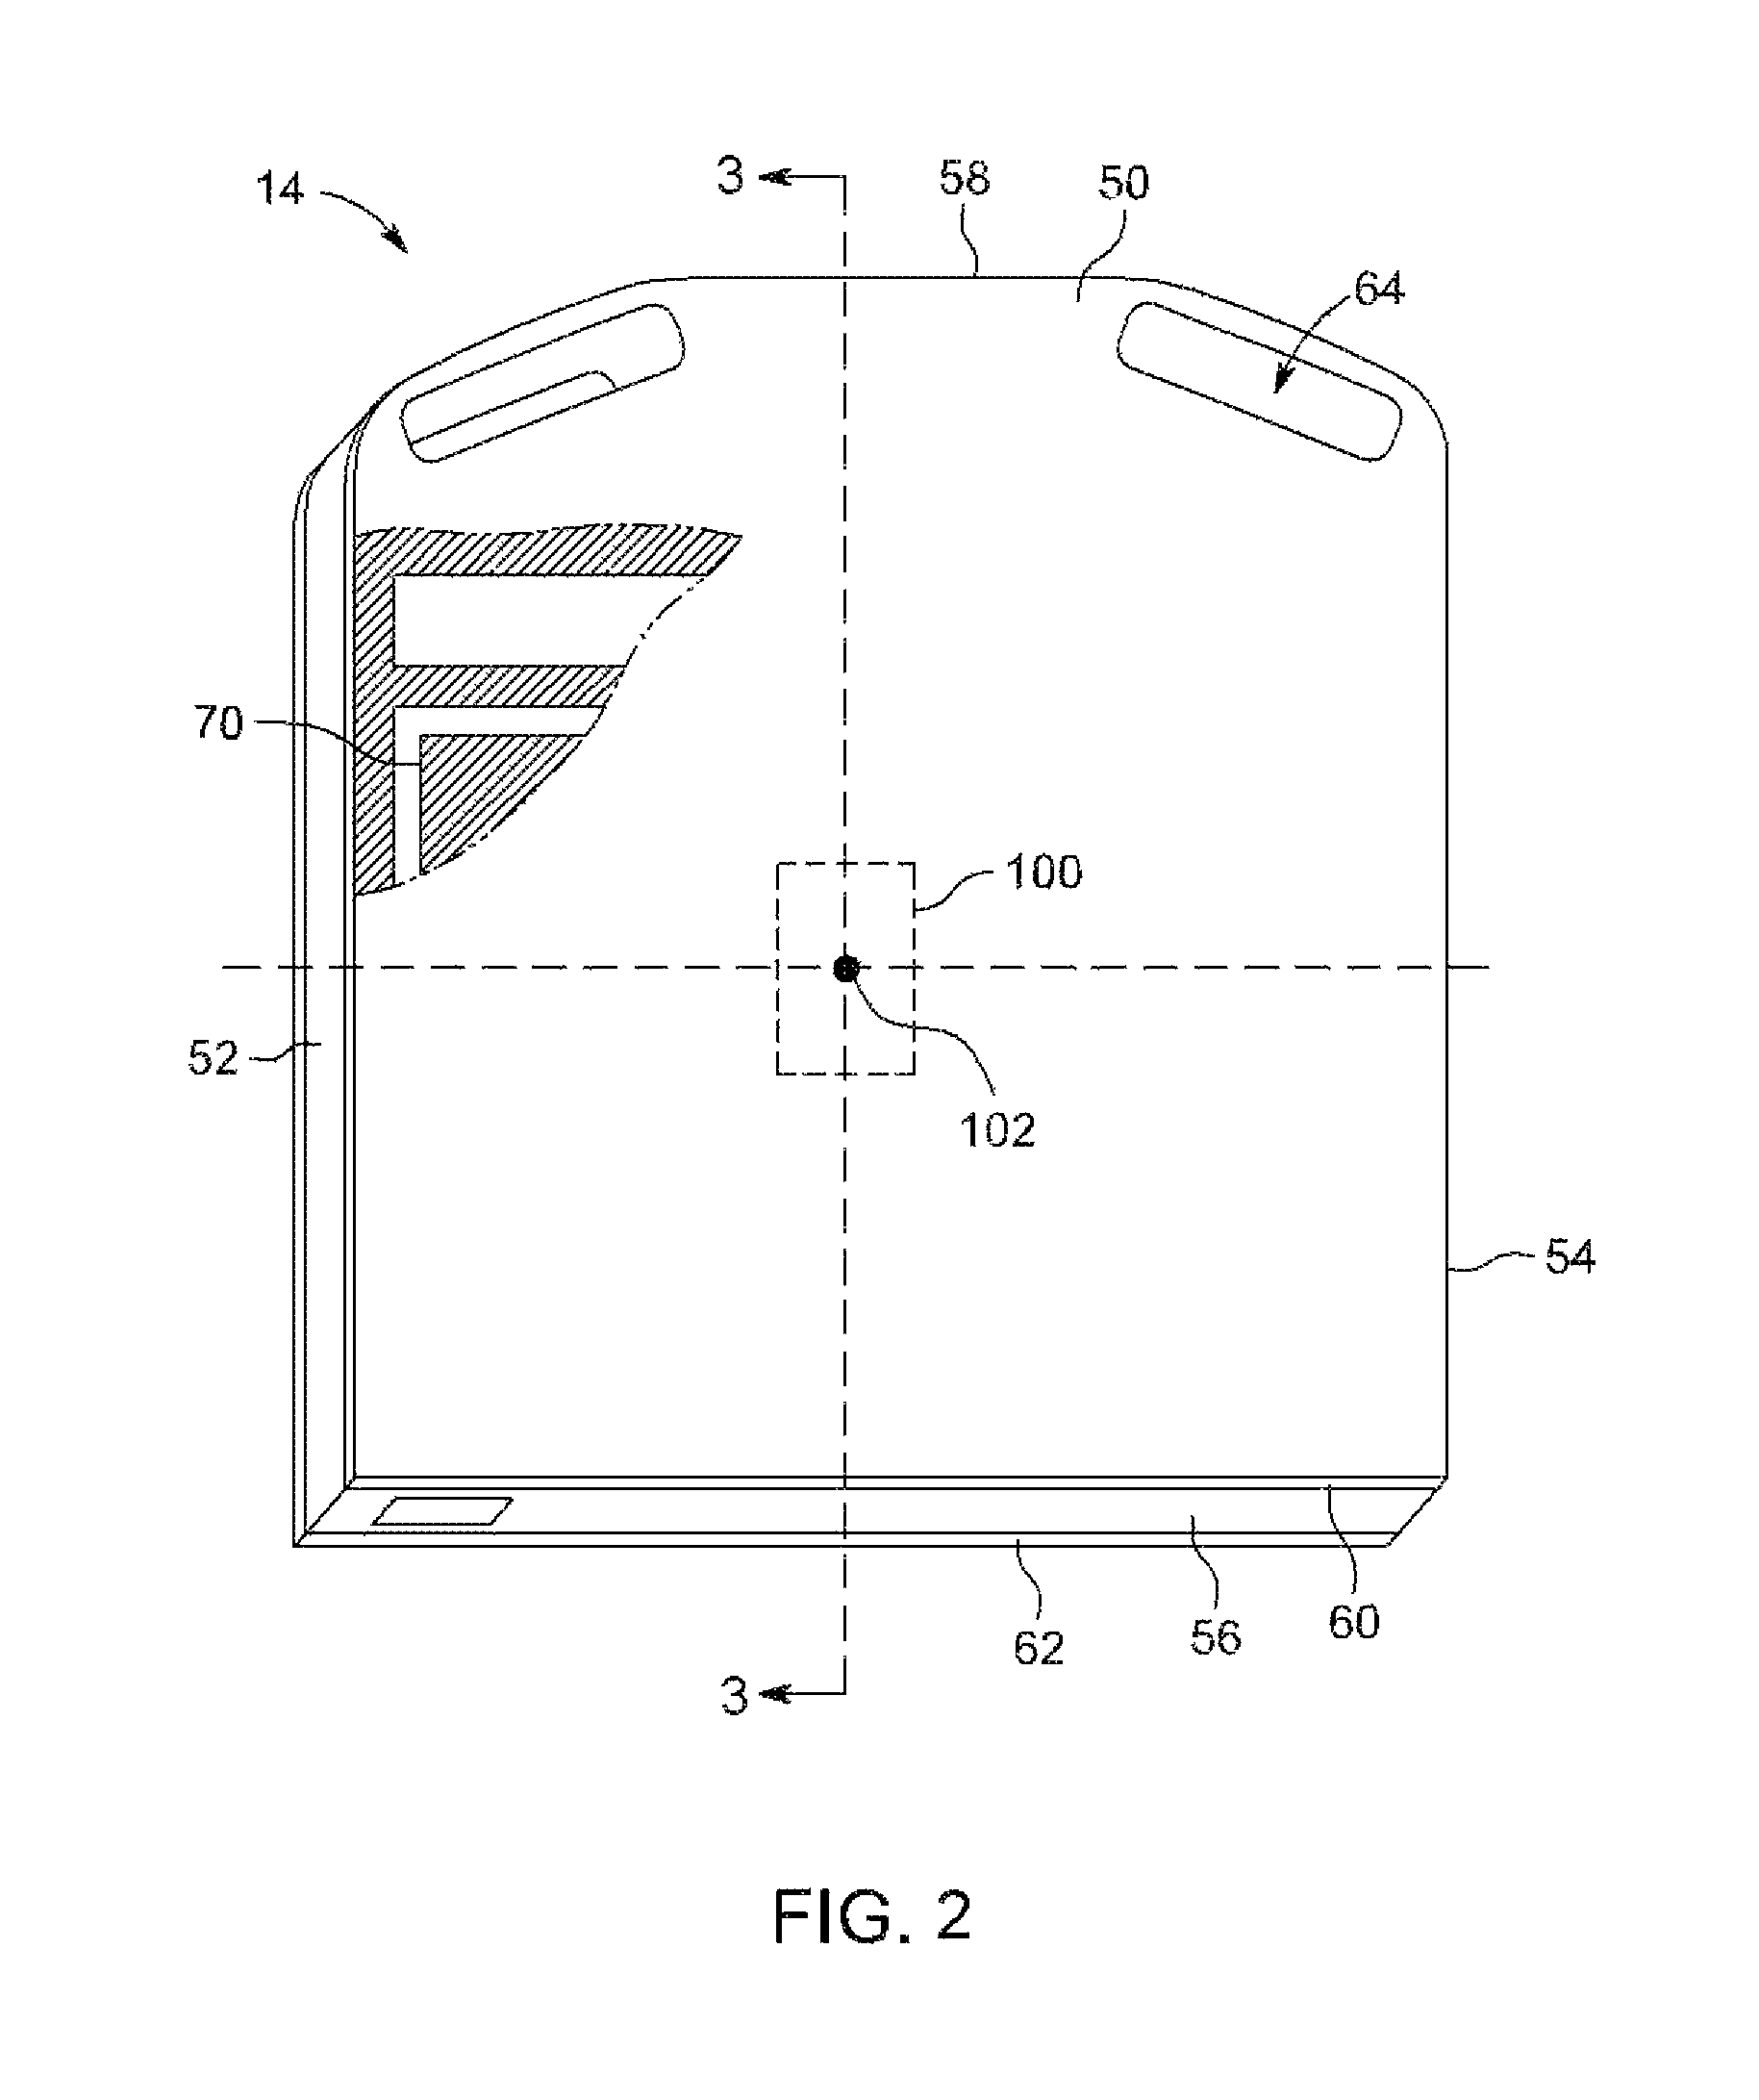 Position sensing device for a portable detection device